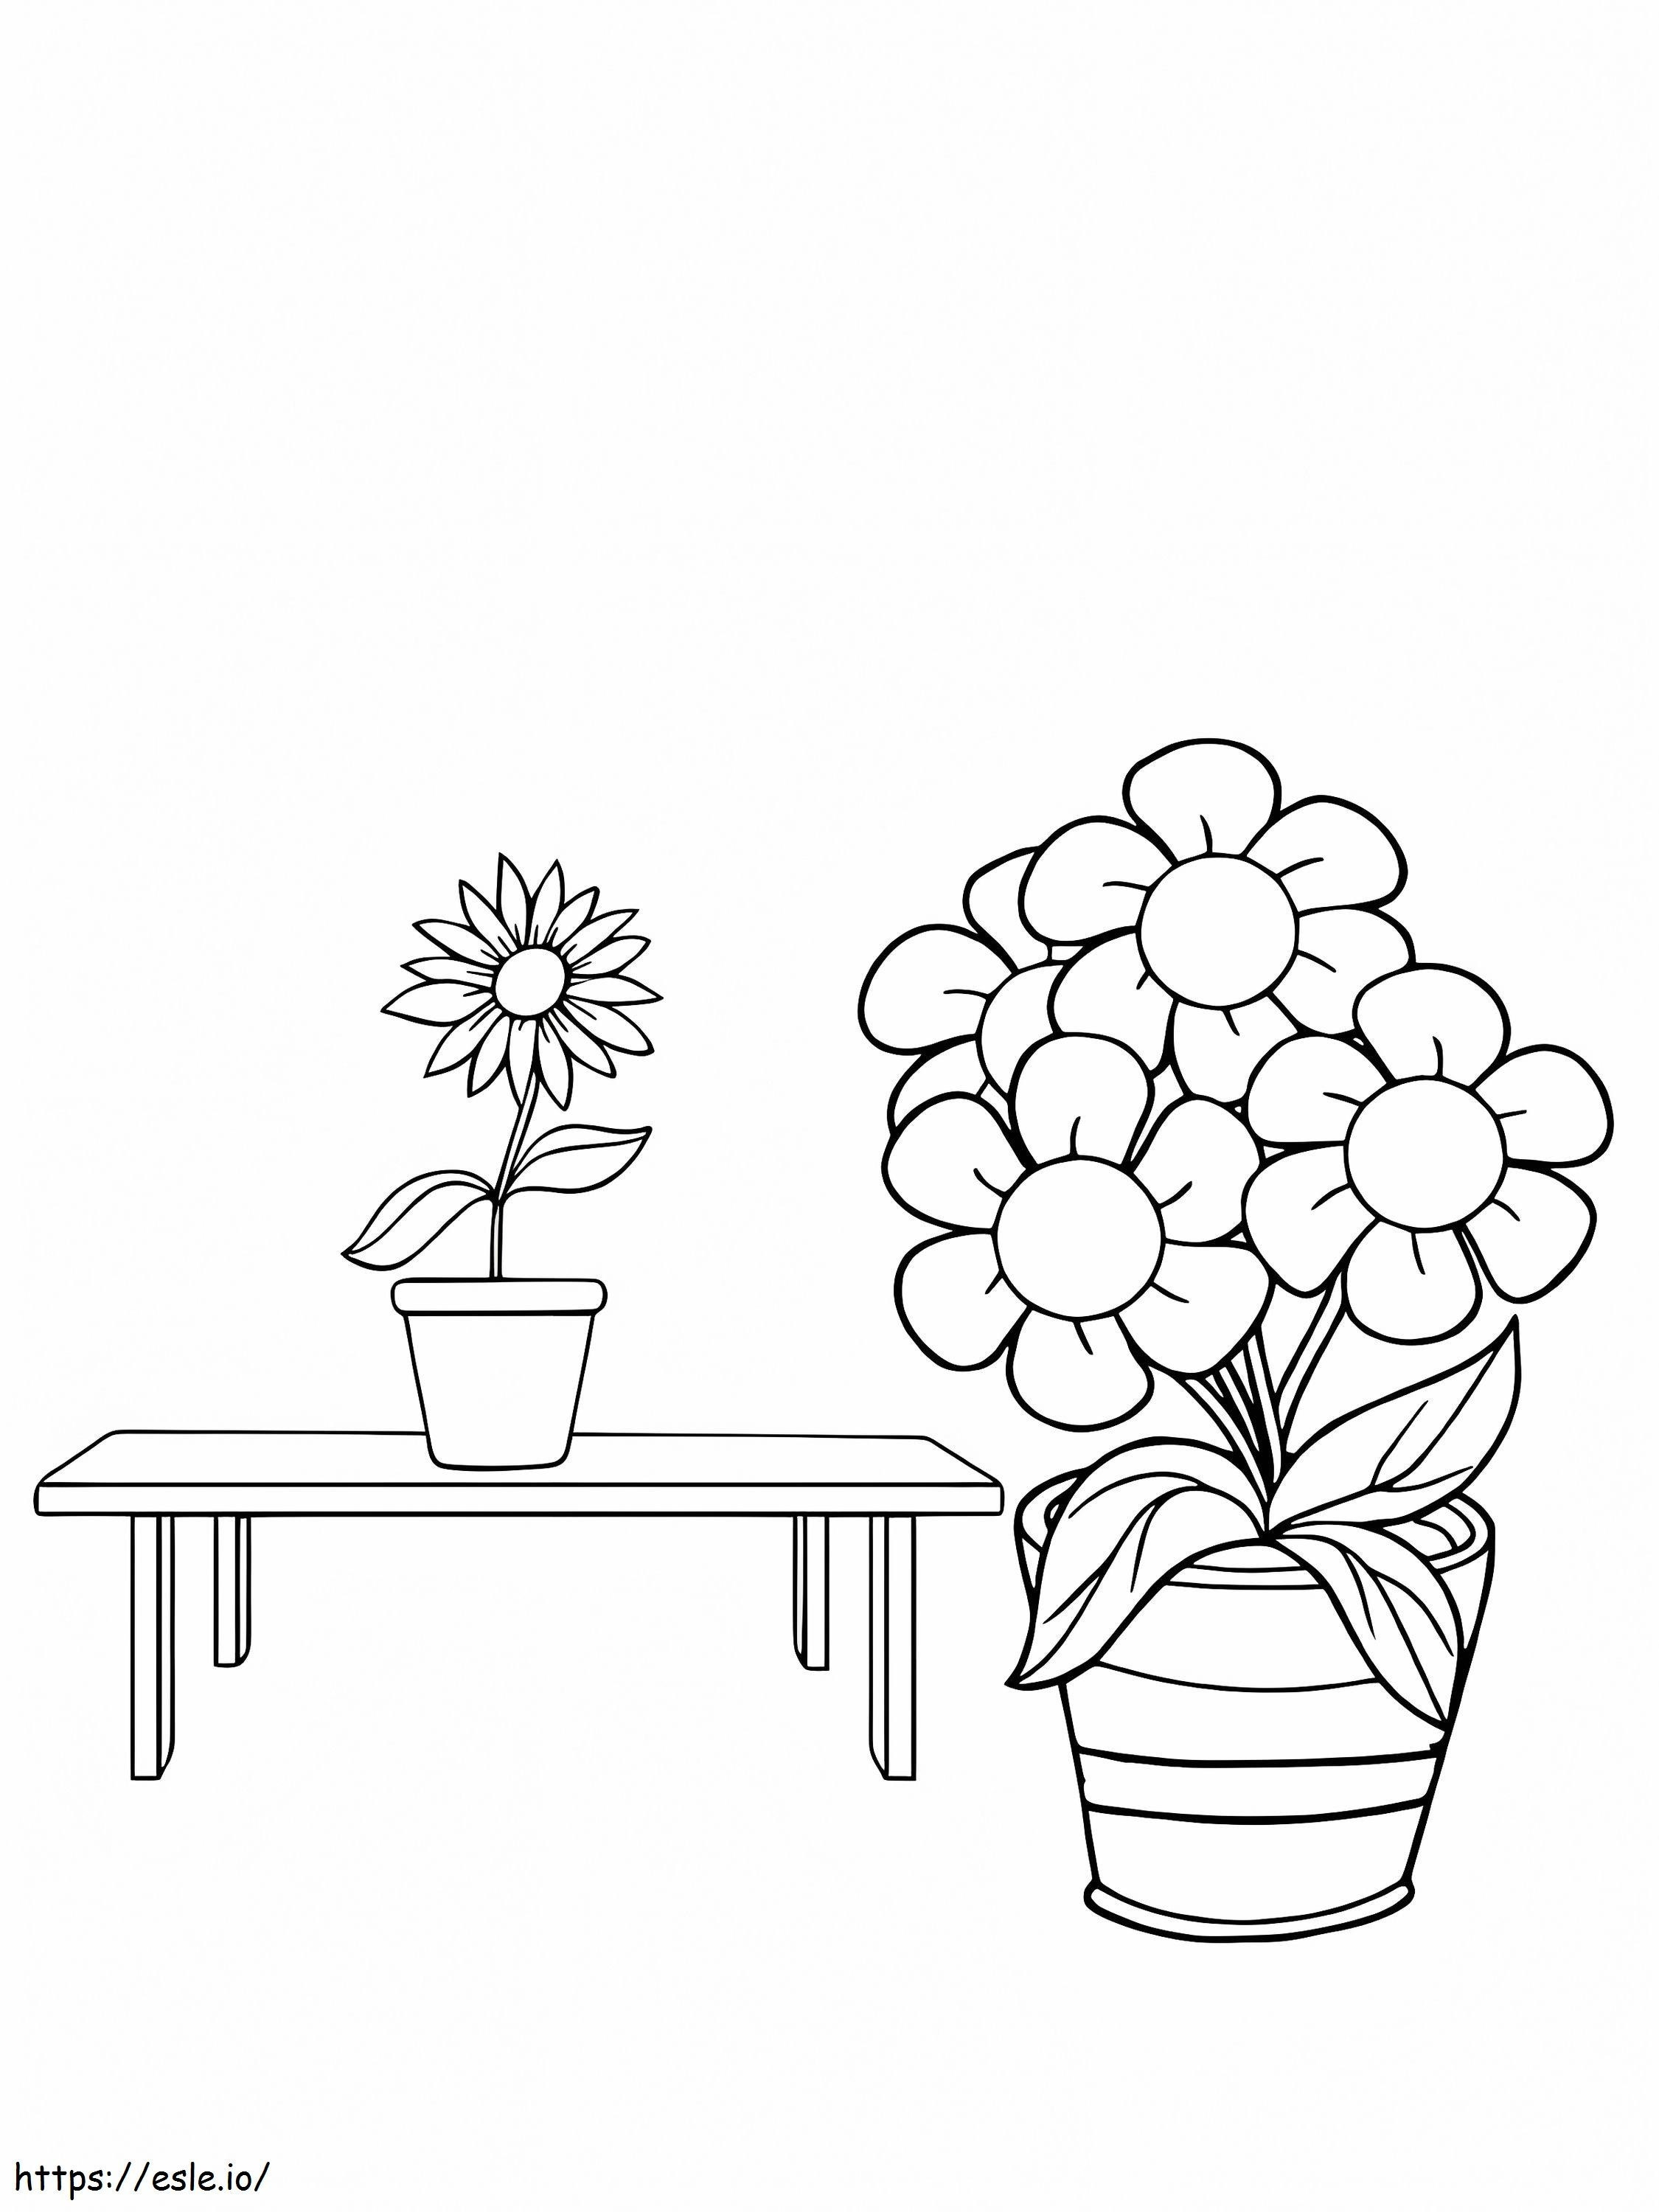 Two Flower Vases coloring page